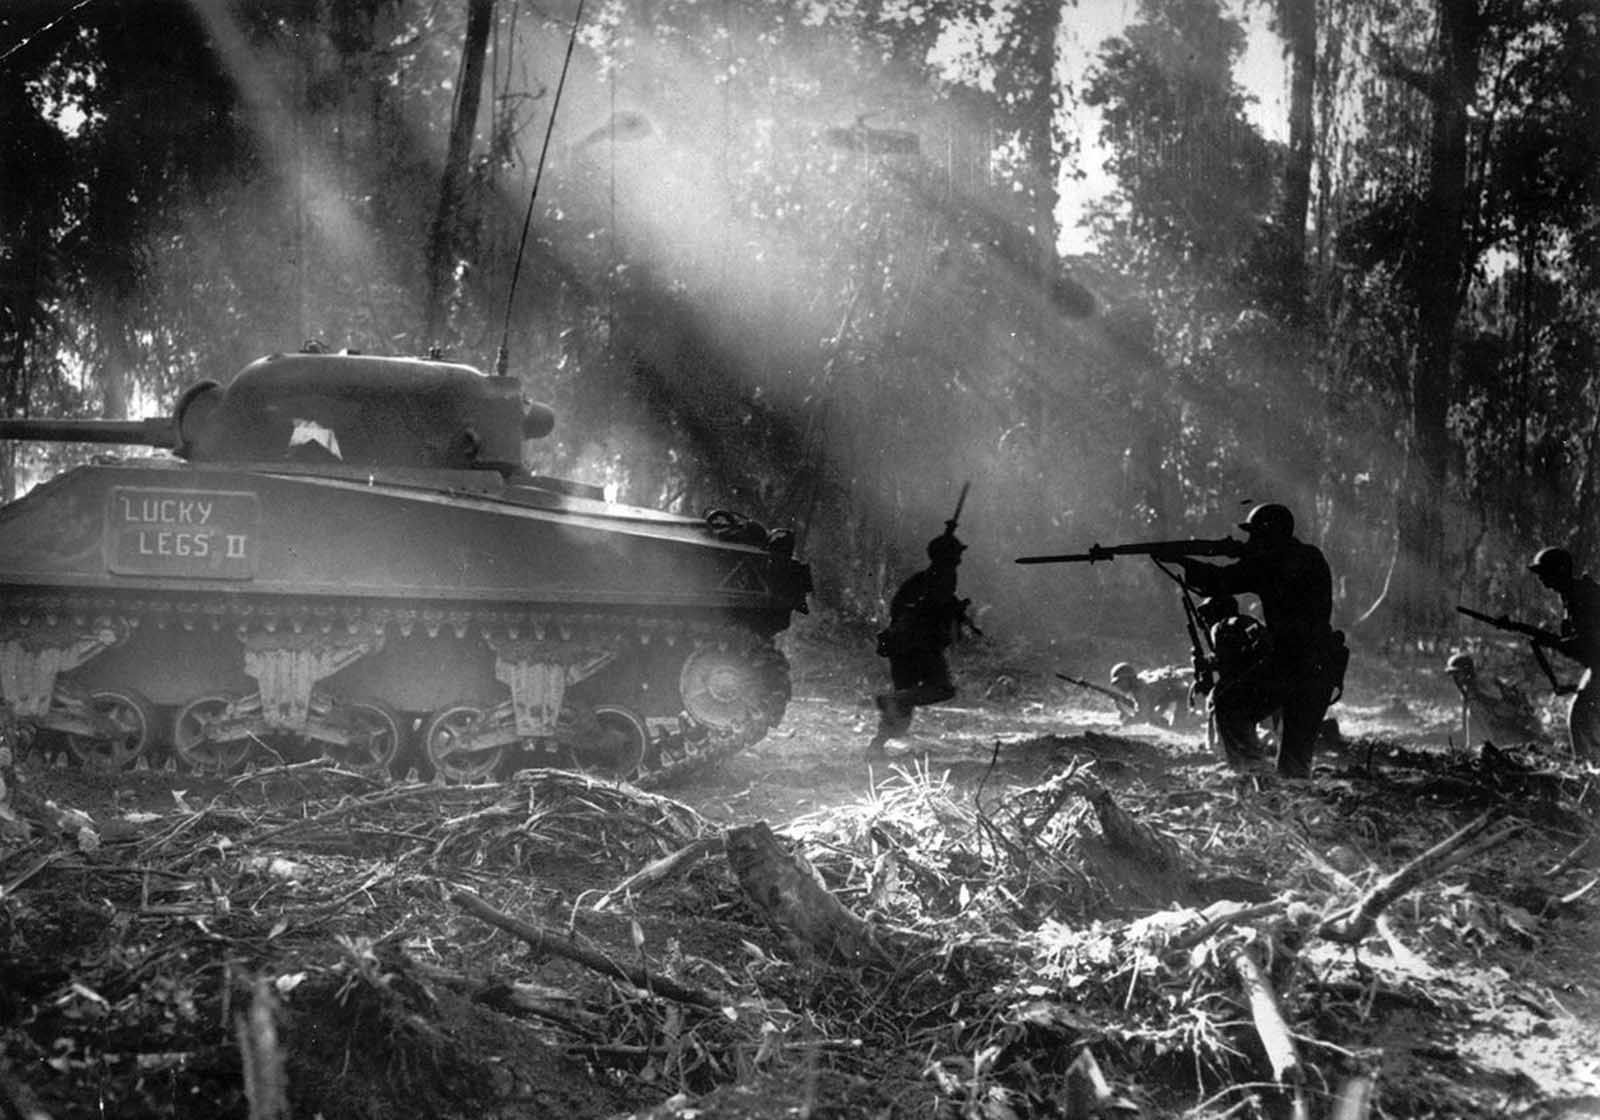 Following in the cover of a tank, American infantrymen secure an area on Bougainville, Solomon Islands, in March 1944, after Japanese forces infiltrated their lines during the night.